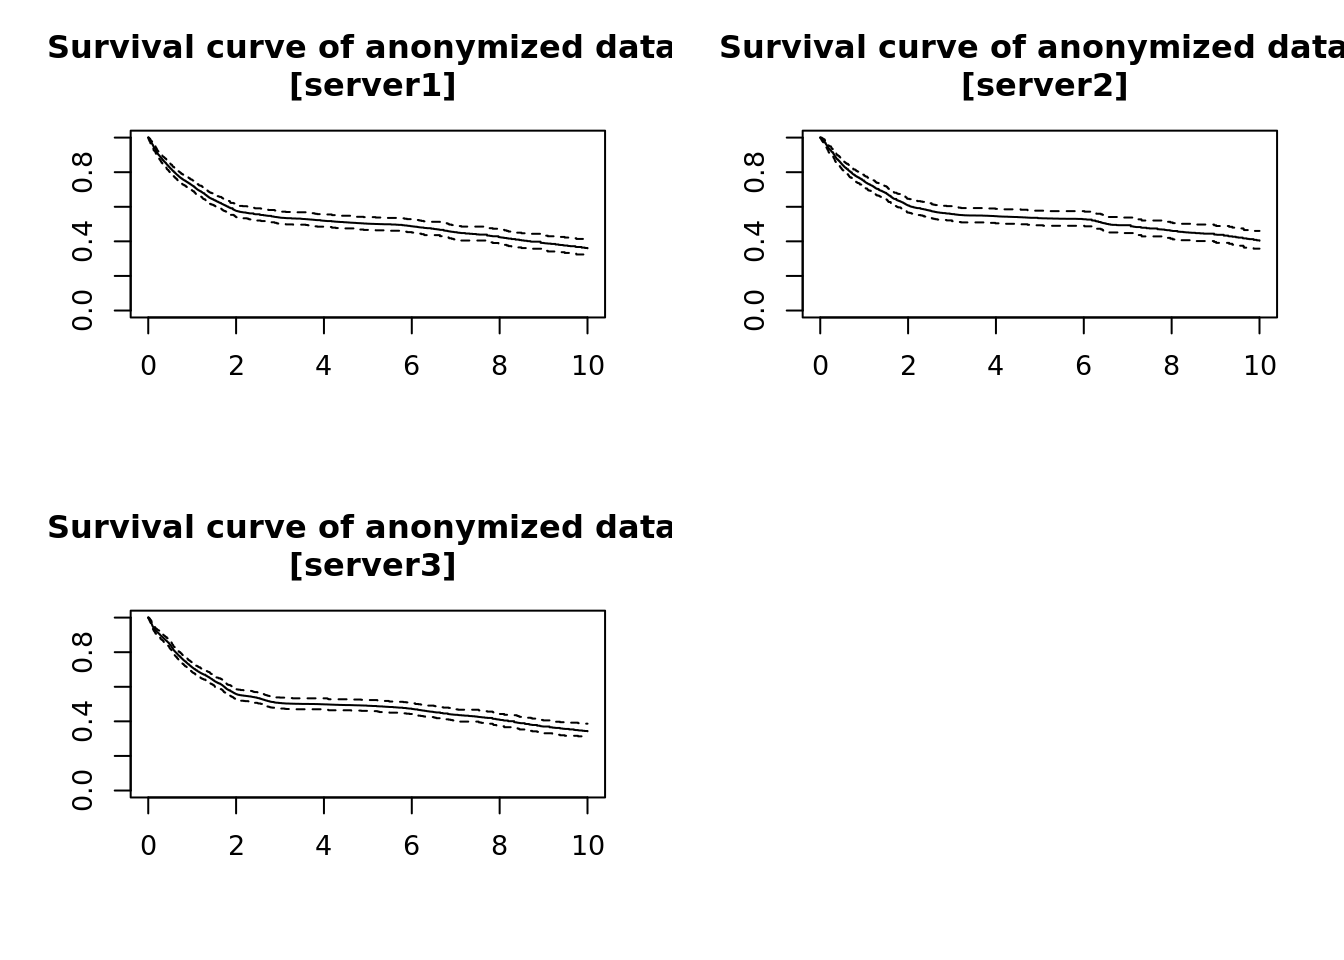 Privacy preserving survival curves.